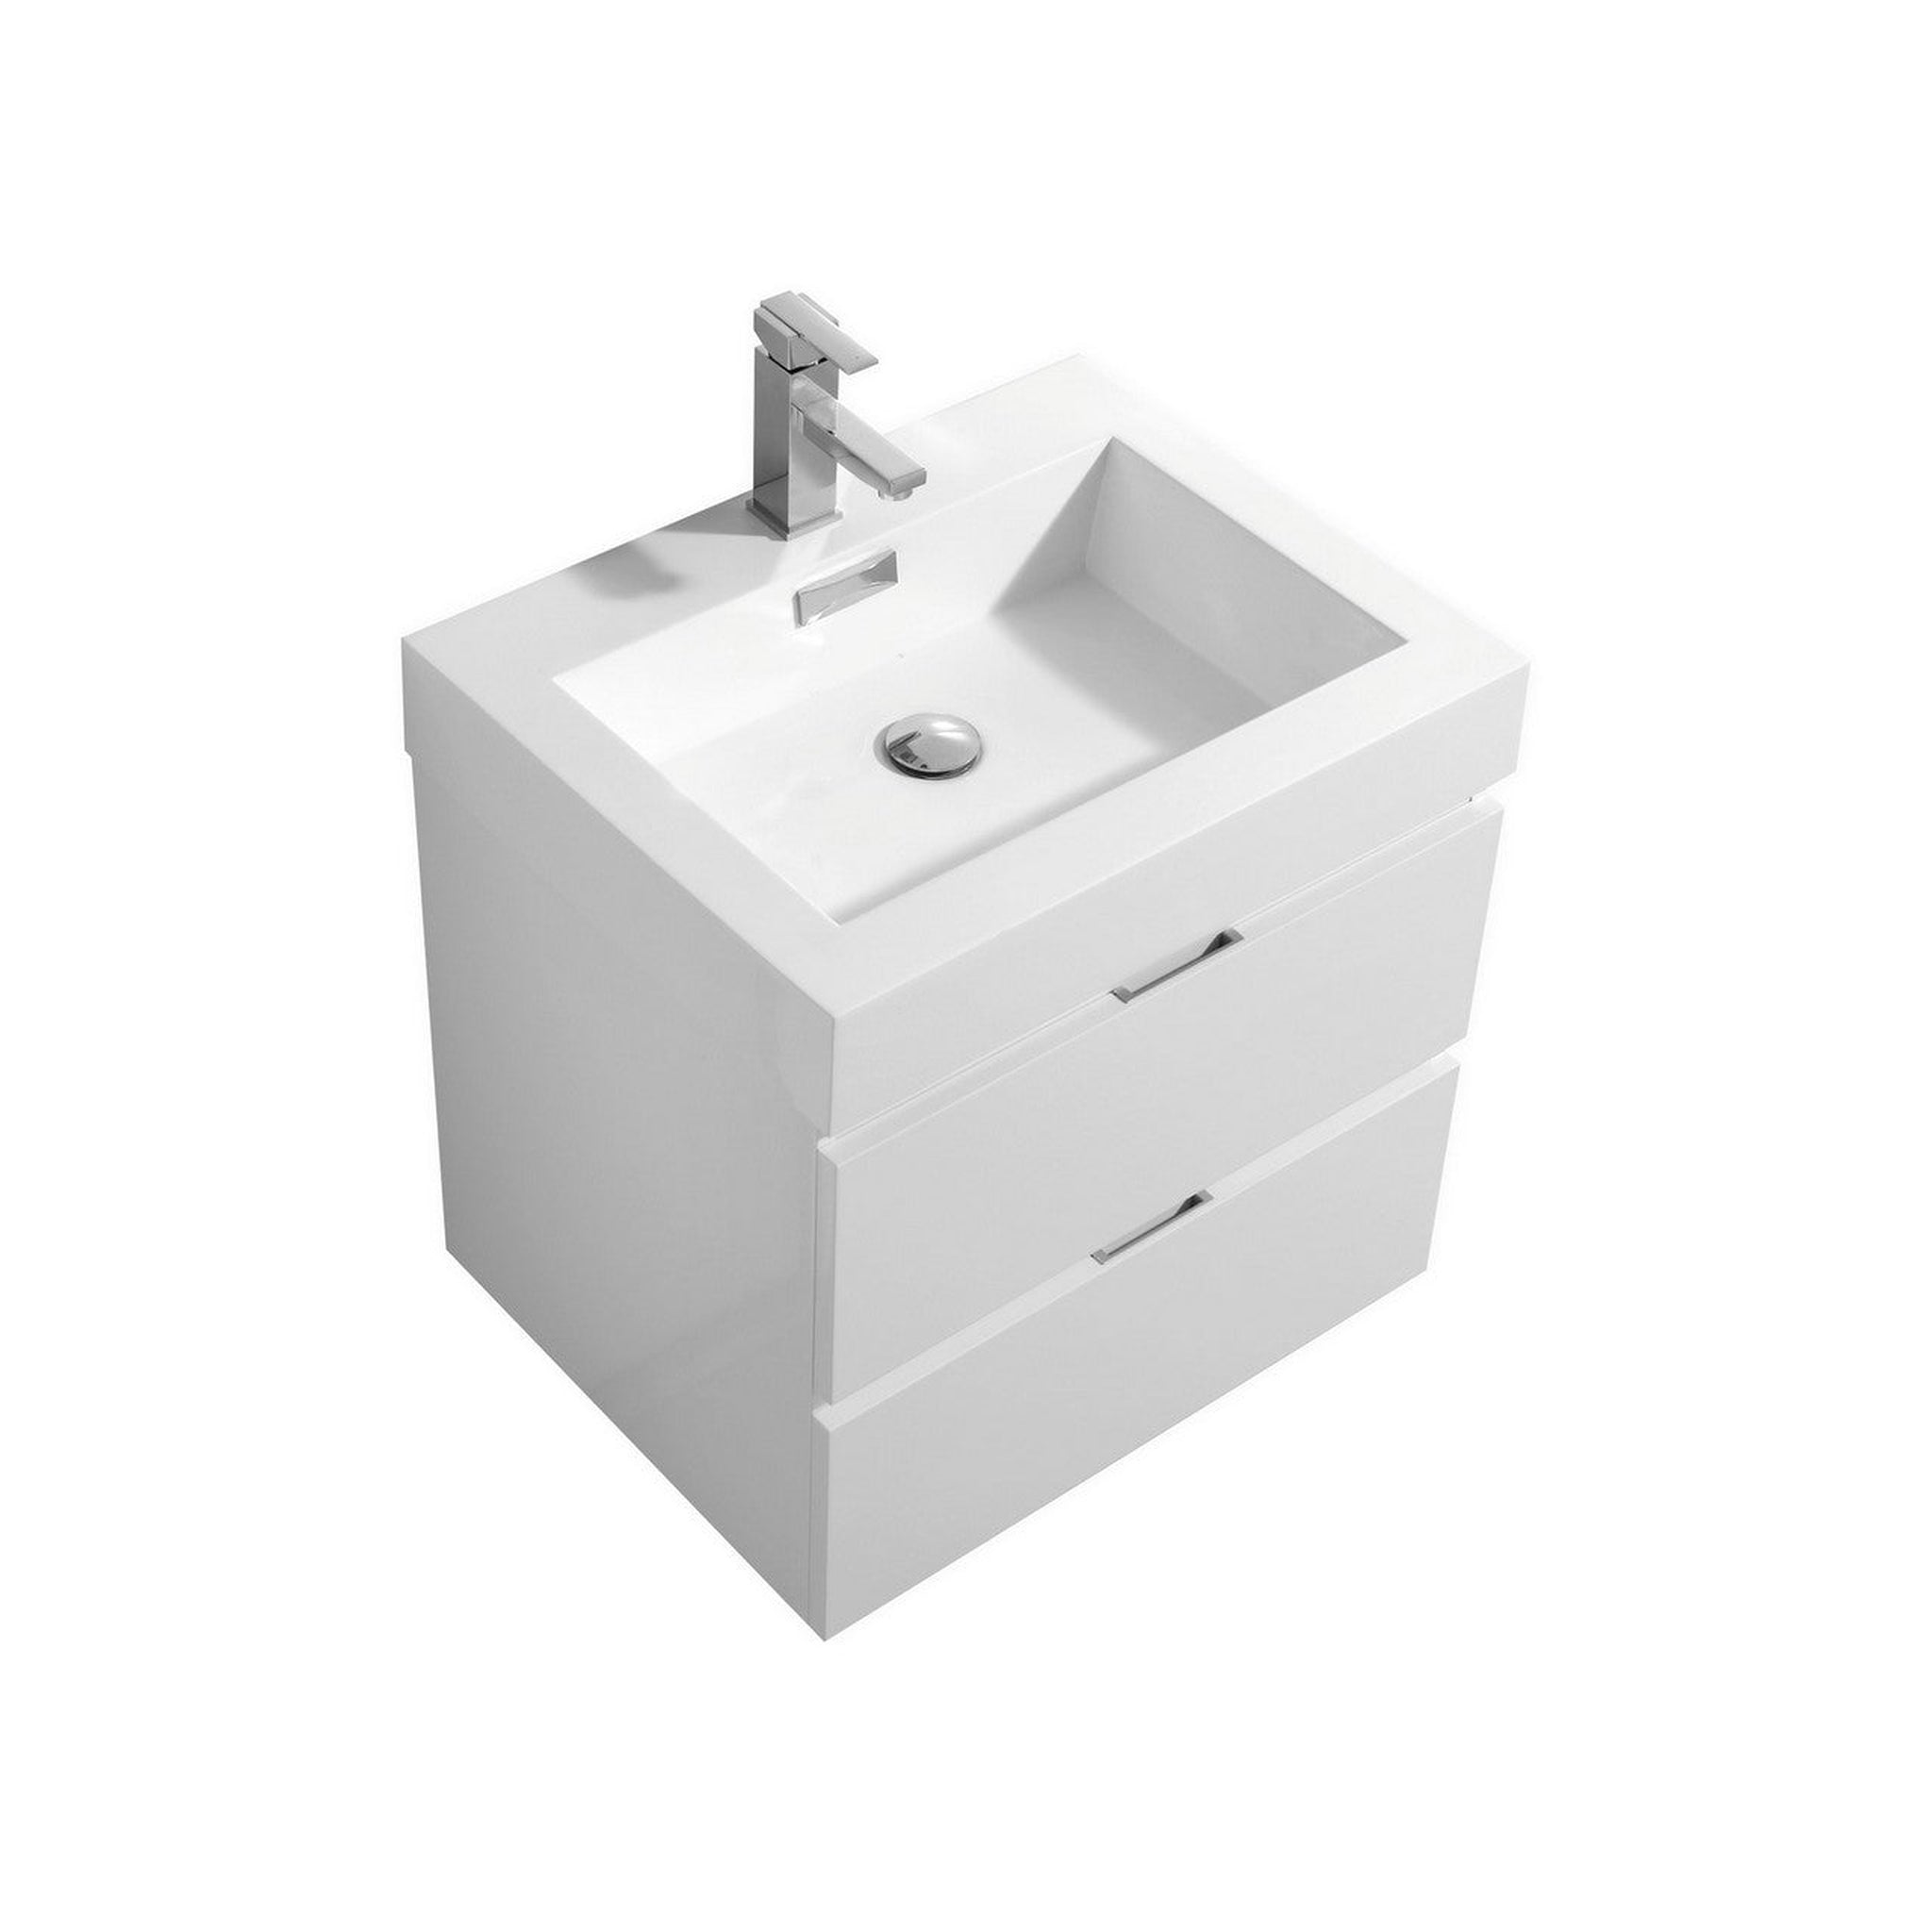 KubeBath, KubeBath Bliss 24" High Gloss White Wall-Mounted Modern Bathroom Vanity With Single Integrated Acrylic Sink With Overflow and 24" White Framed Mirror With Shelf